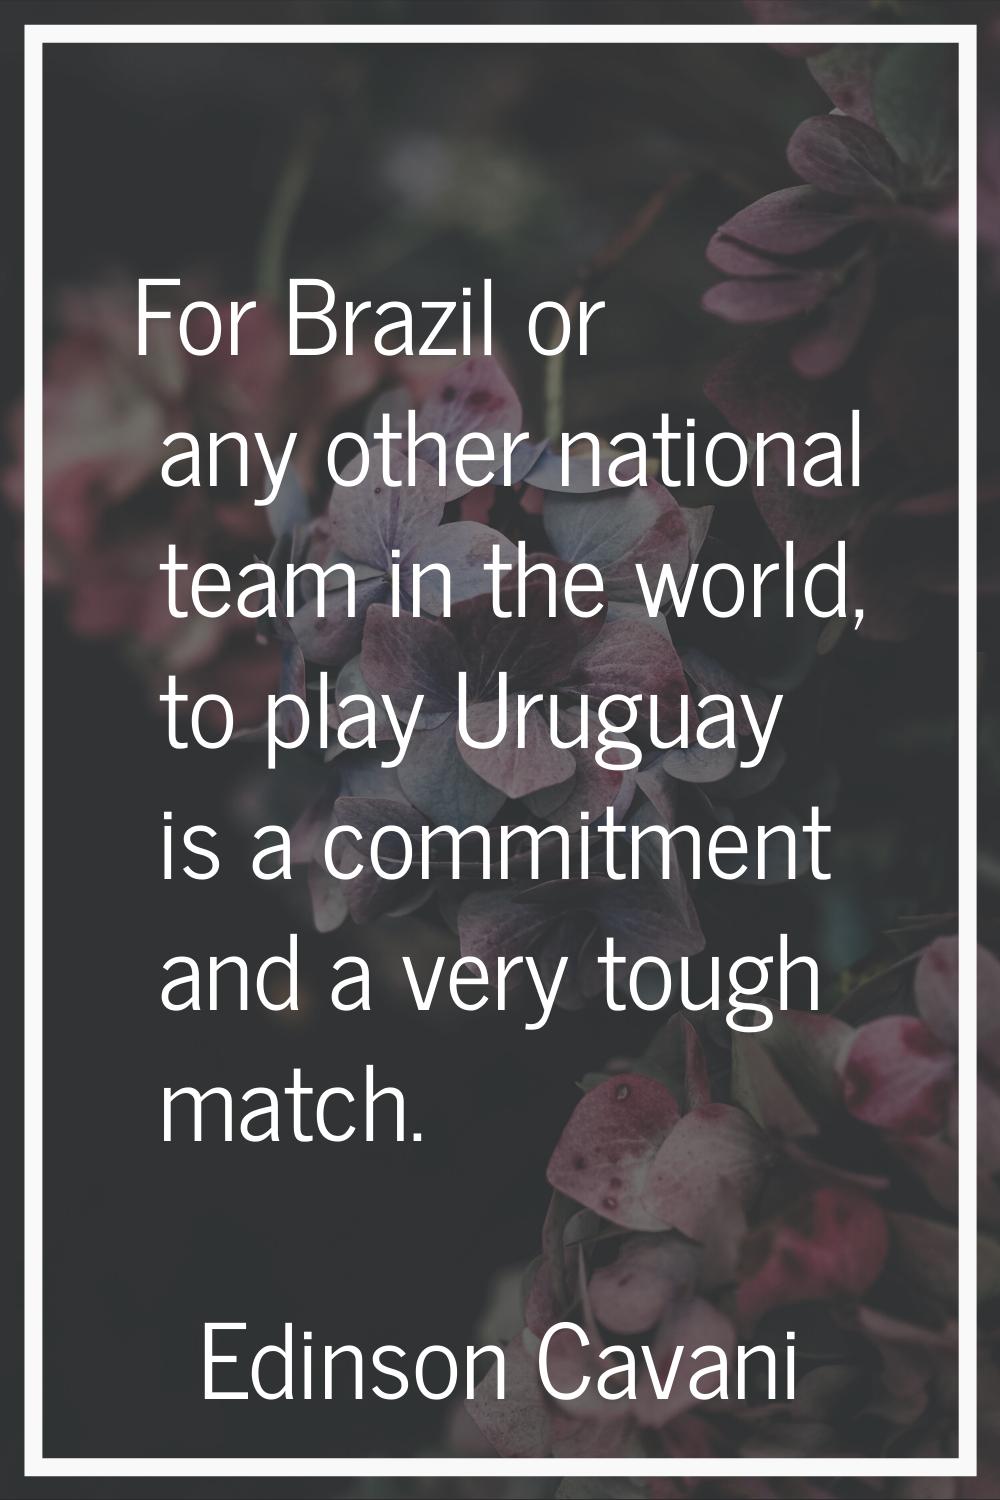 For Brazil or any other national team in the world, to play Uruguay is a commitment and a very toug